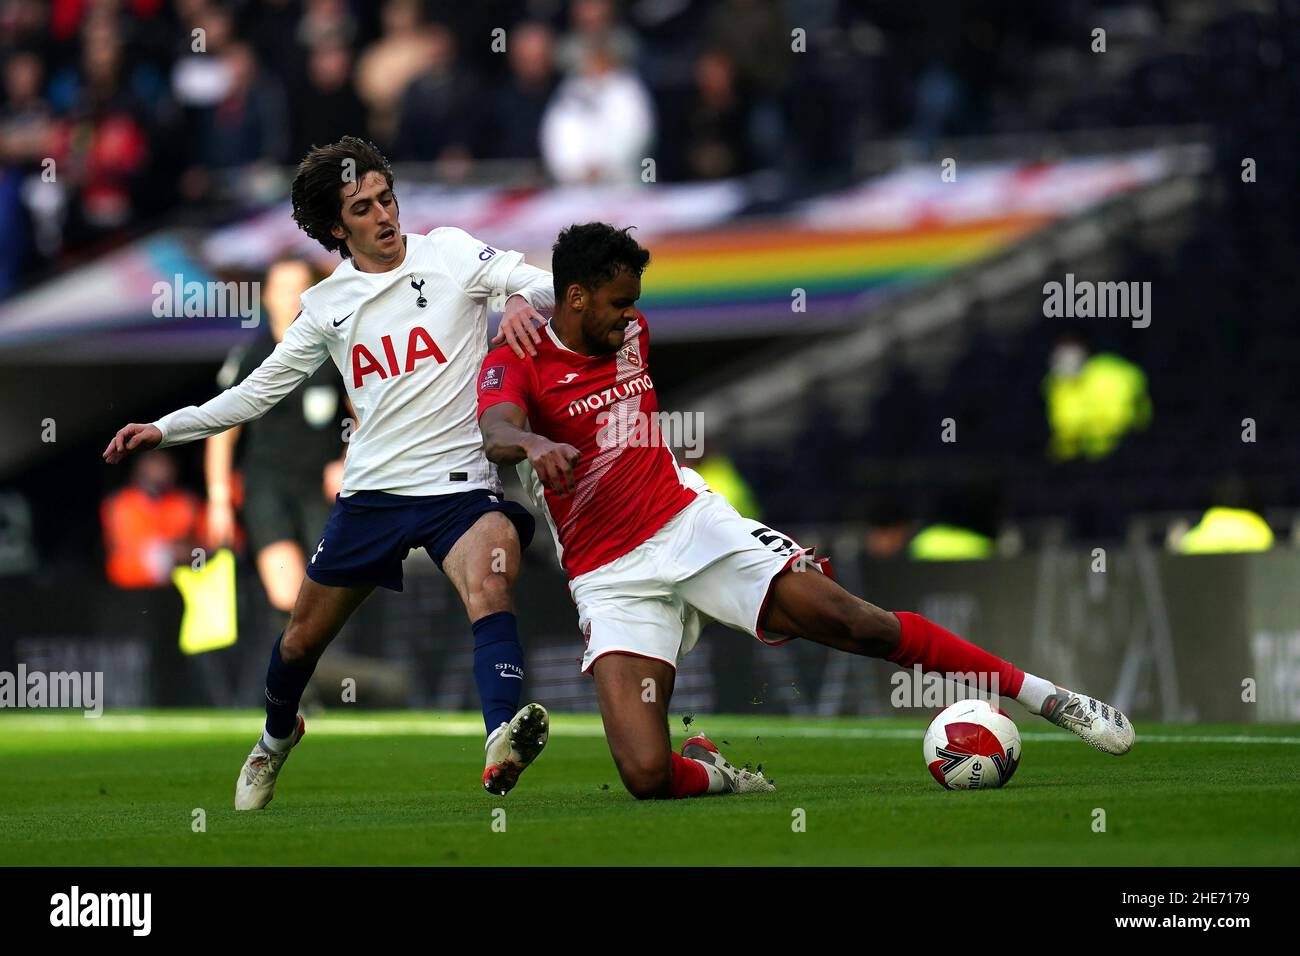 Tottenham Hotspur's Bryan Gil Salvatierra (left) and Morcambe's Jacob Bedeau battle for the ball during the Emirates FA Cup third round match at Tottenham Hotspur Stadium, London. Picture date: Sunday January 9, 2022. Stock Photo